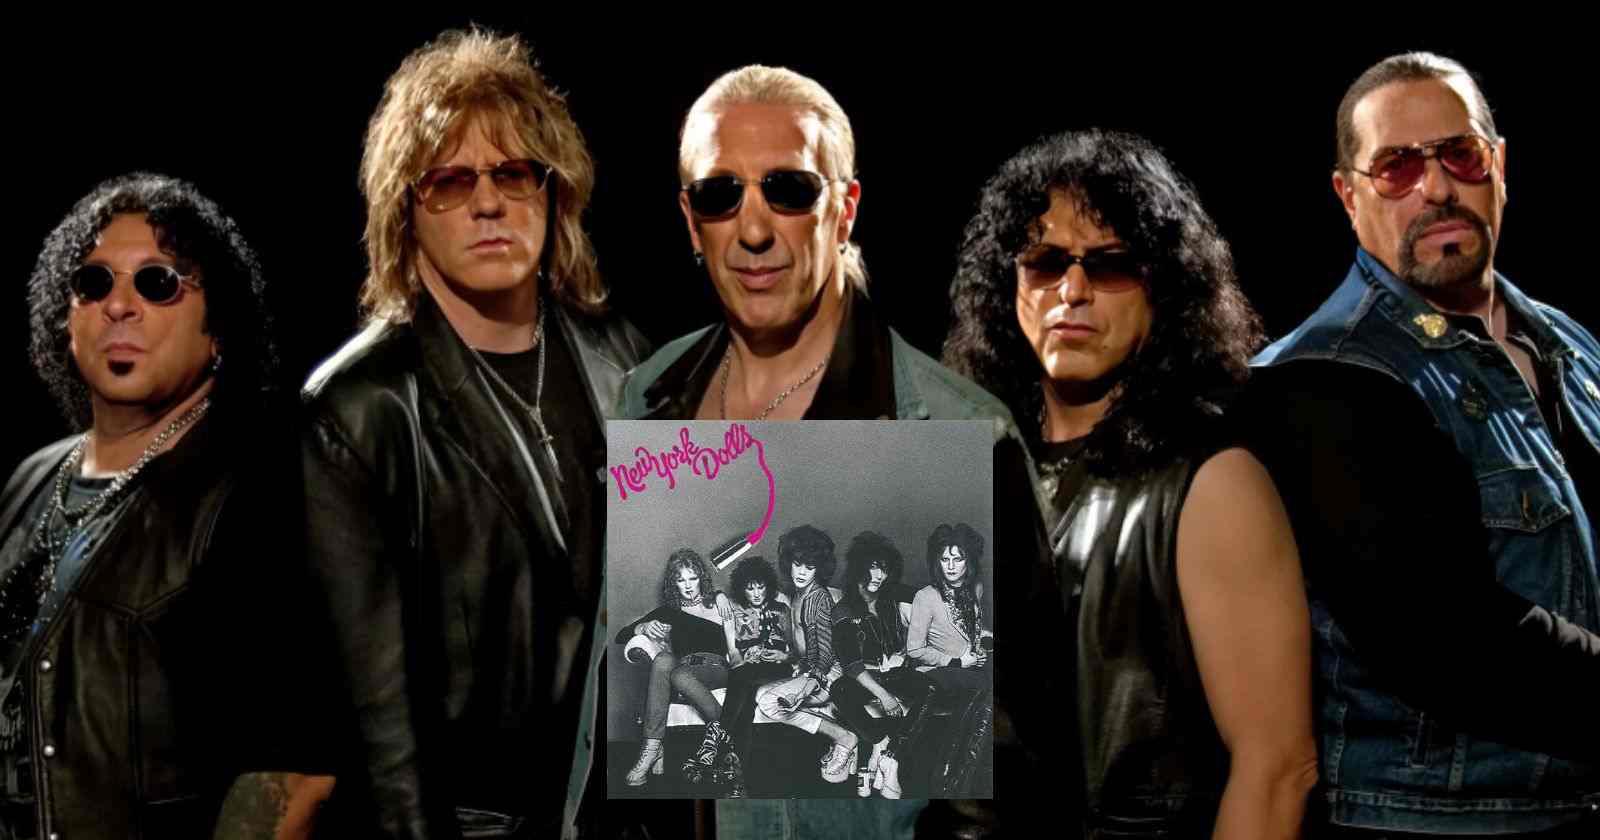 Twisted Sister and New York Dolls album